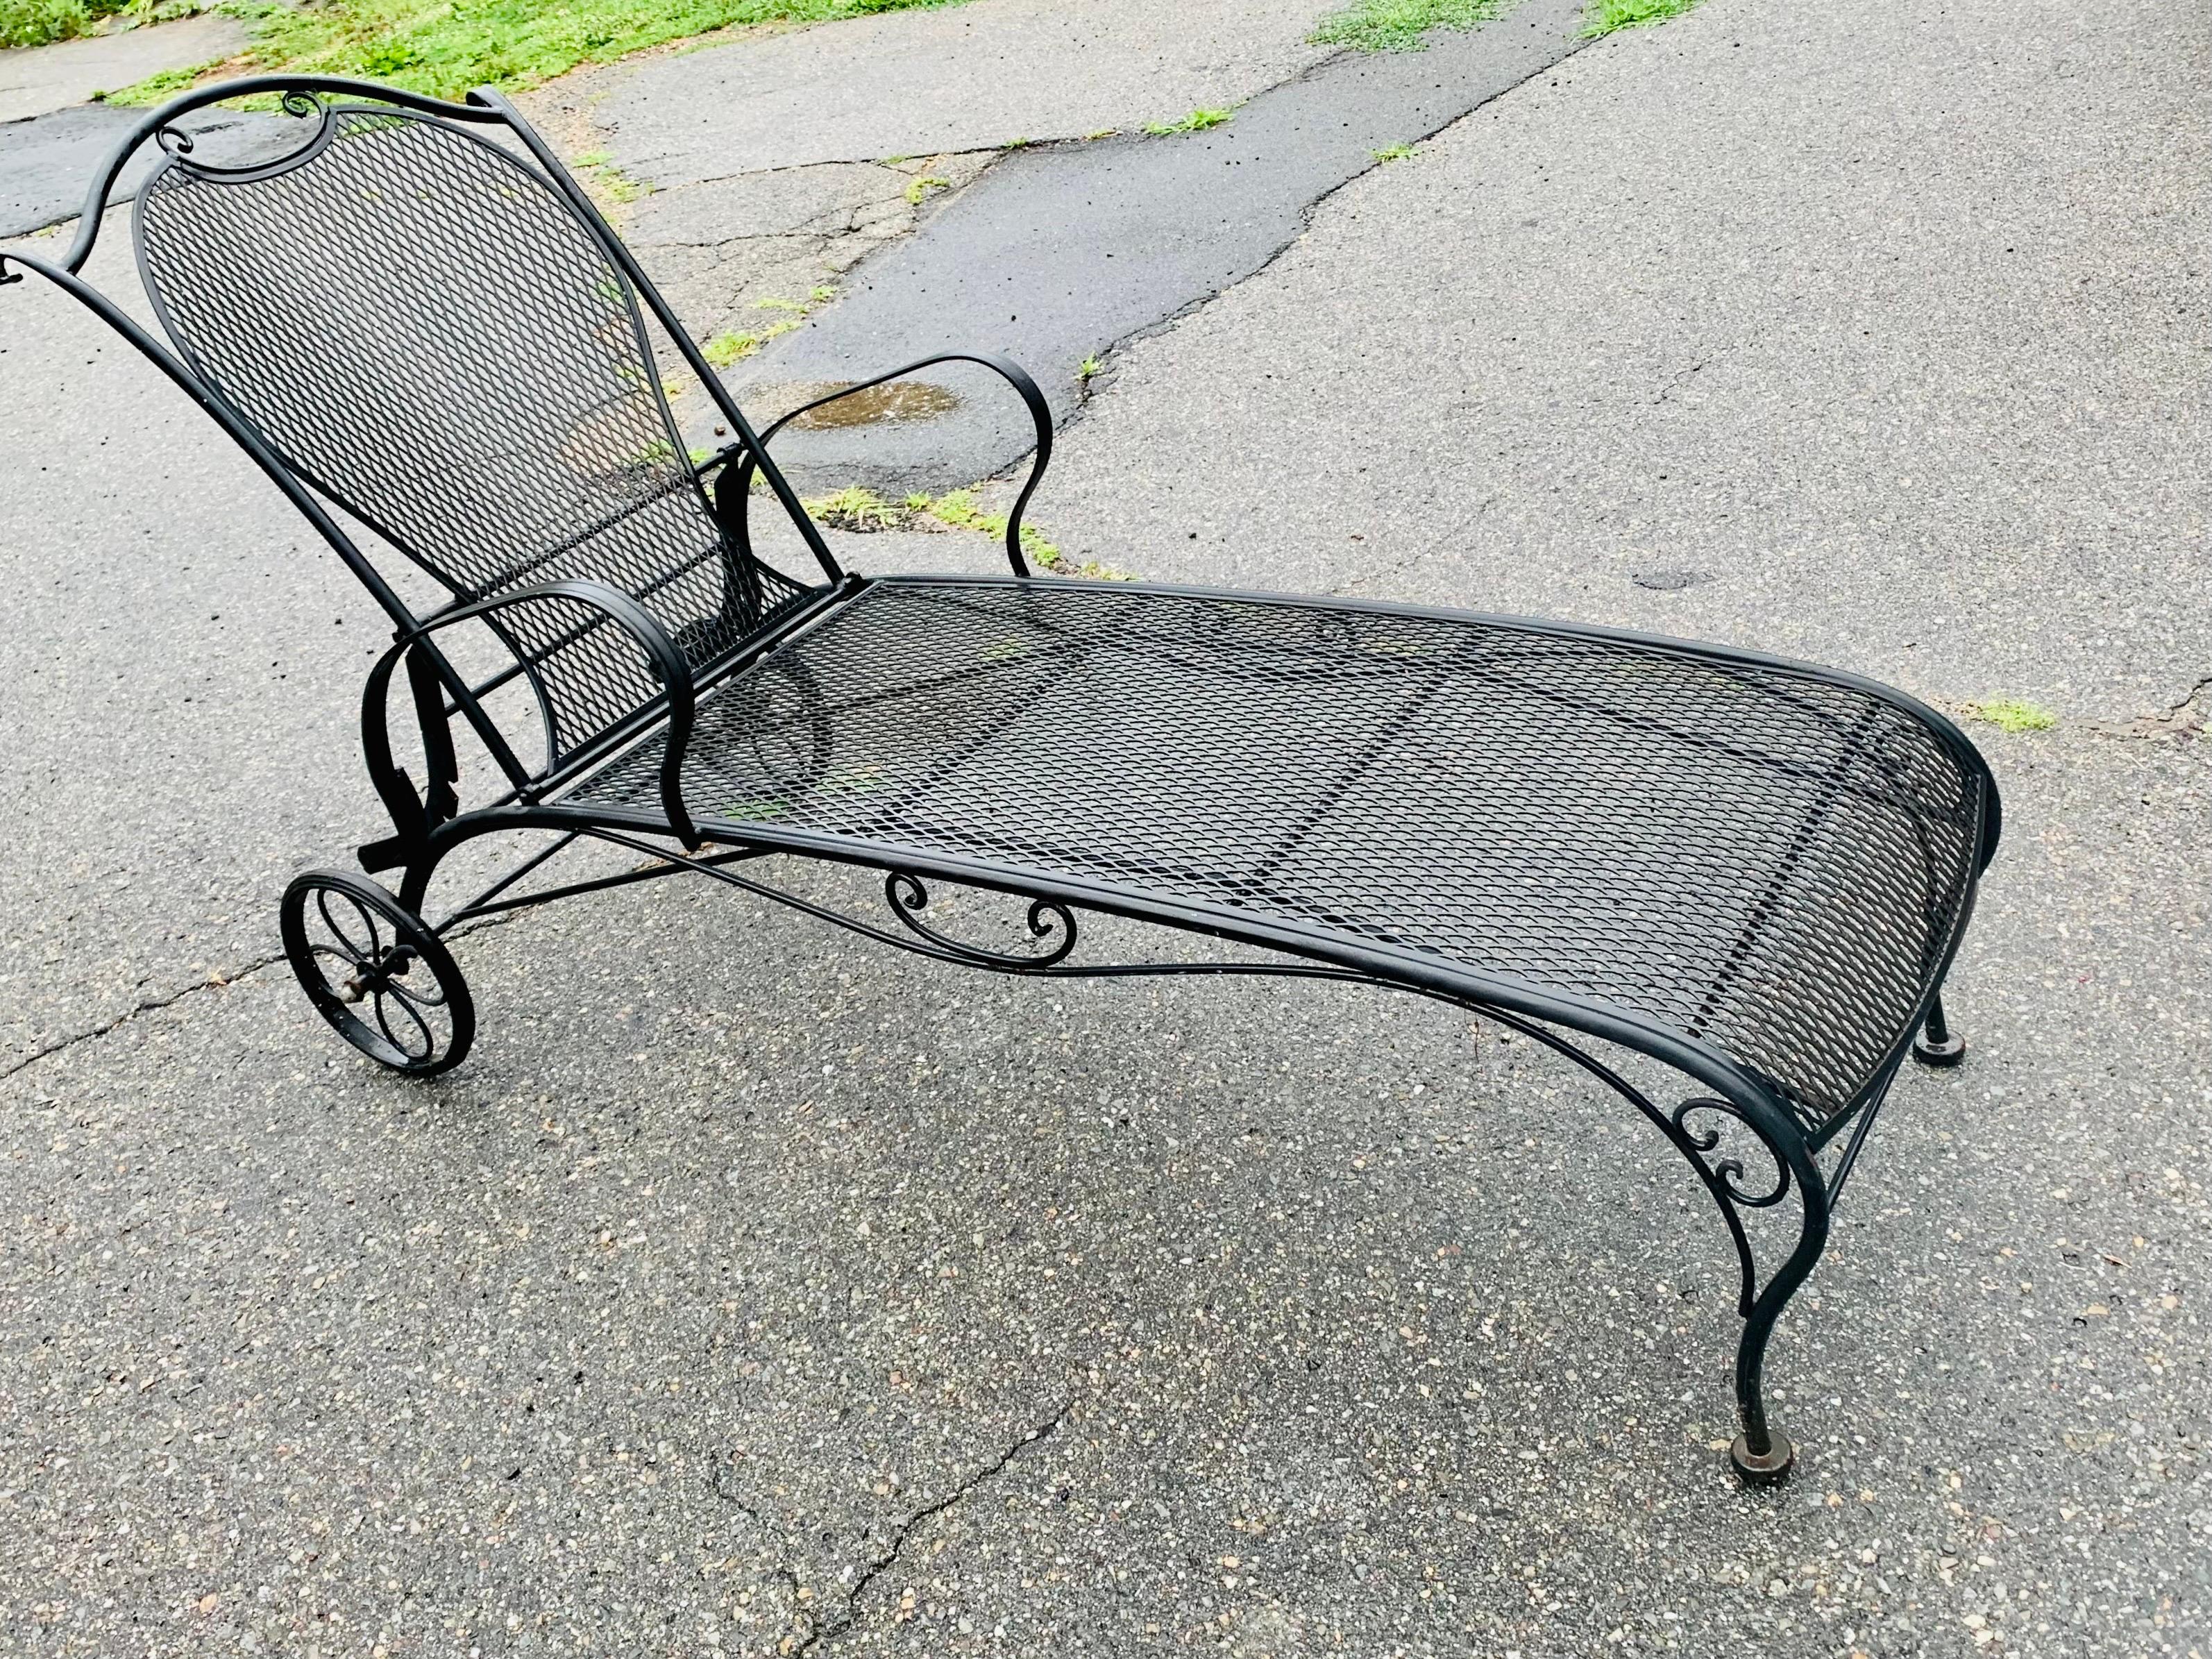 Vintage Woodard Wrought Iron Patio Lounge chair

Available now and ready to ship for your enjoyment.

Adjustable and reclining back with 6 positions
On working wheels 

Paint is in tact and free from rust

Beautiful addition to any garden,